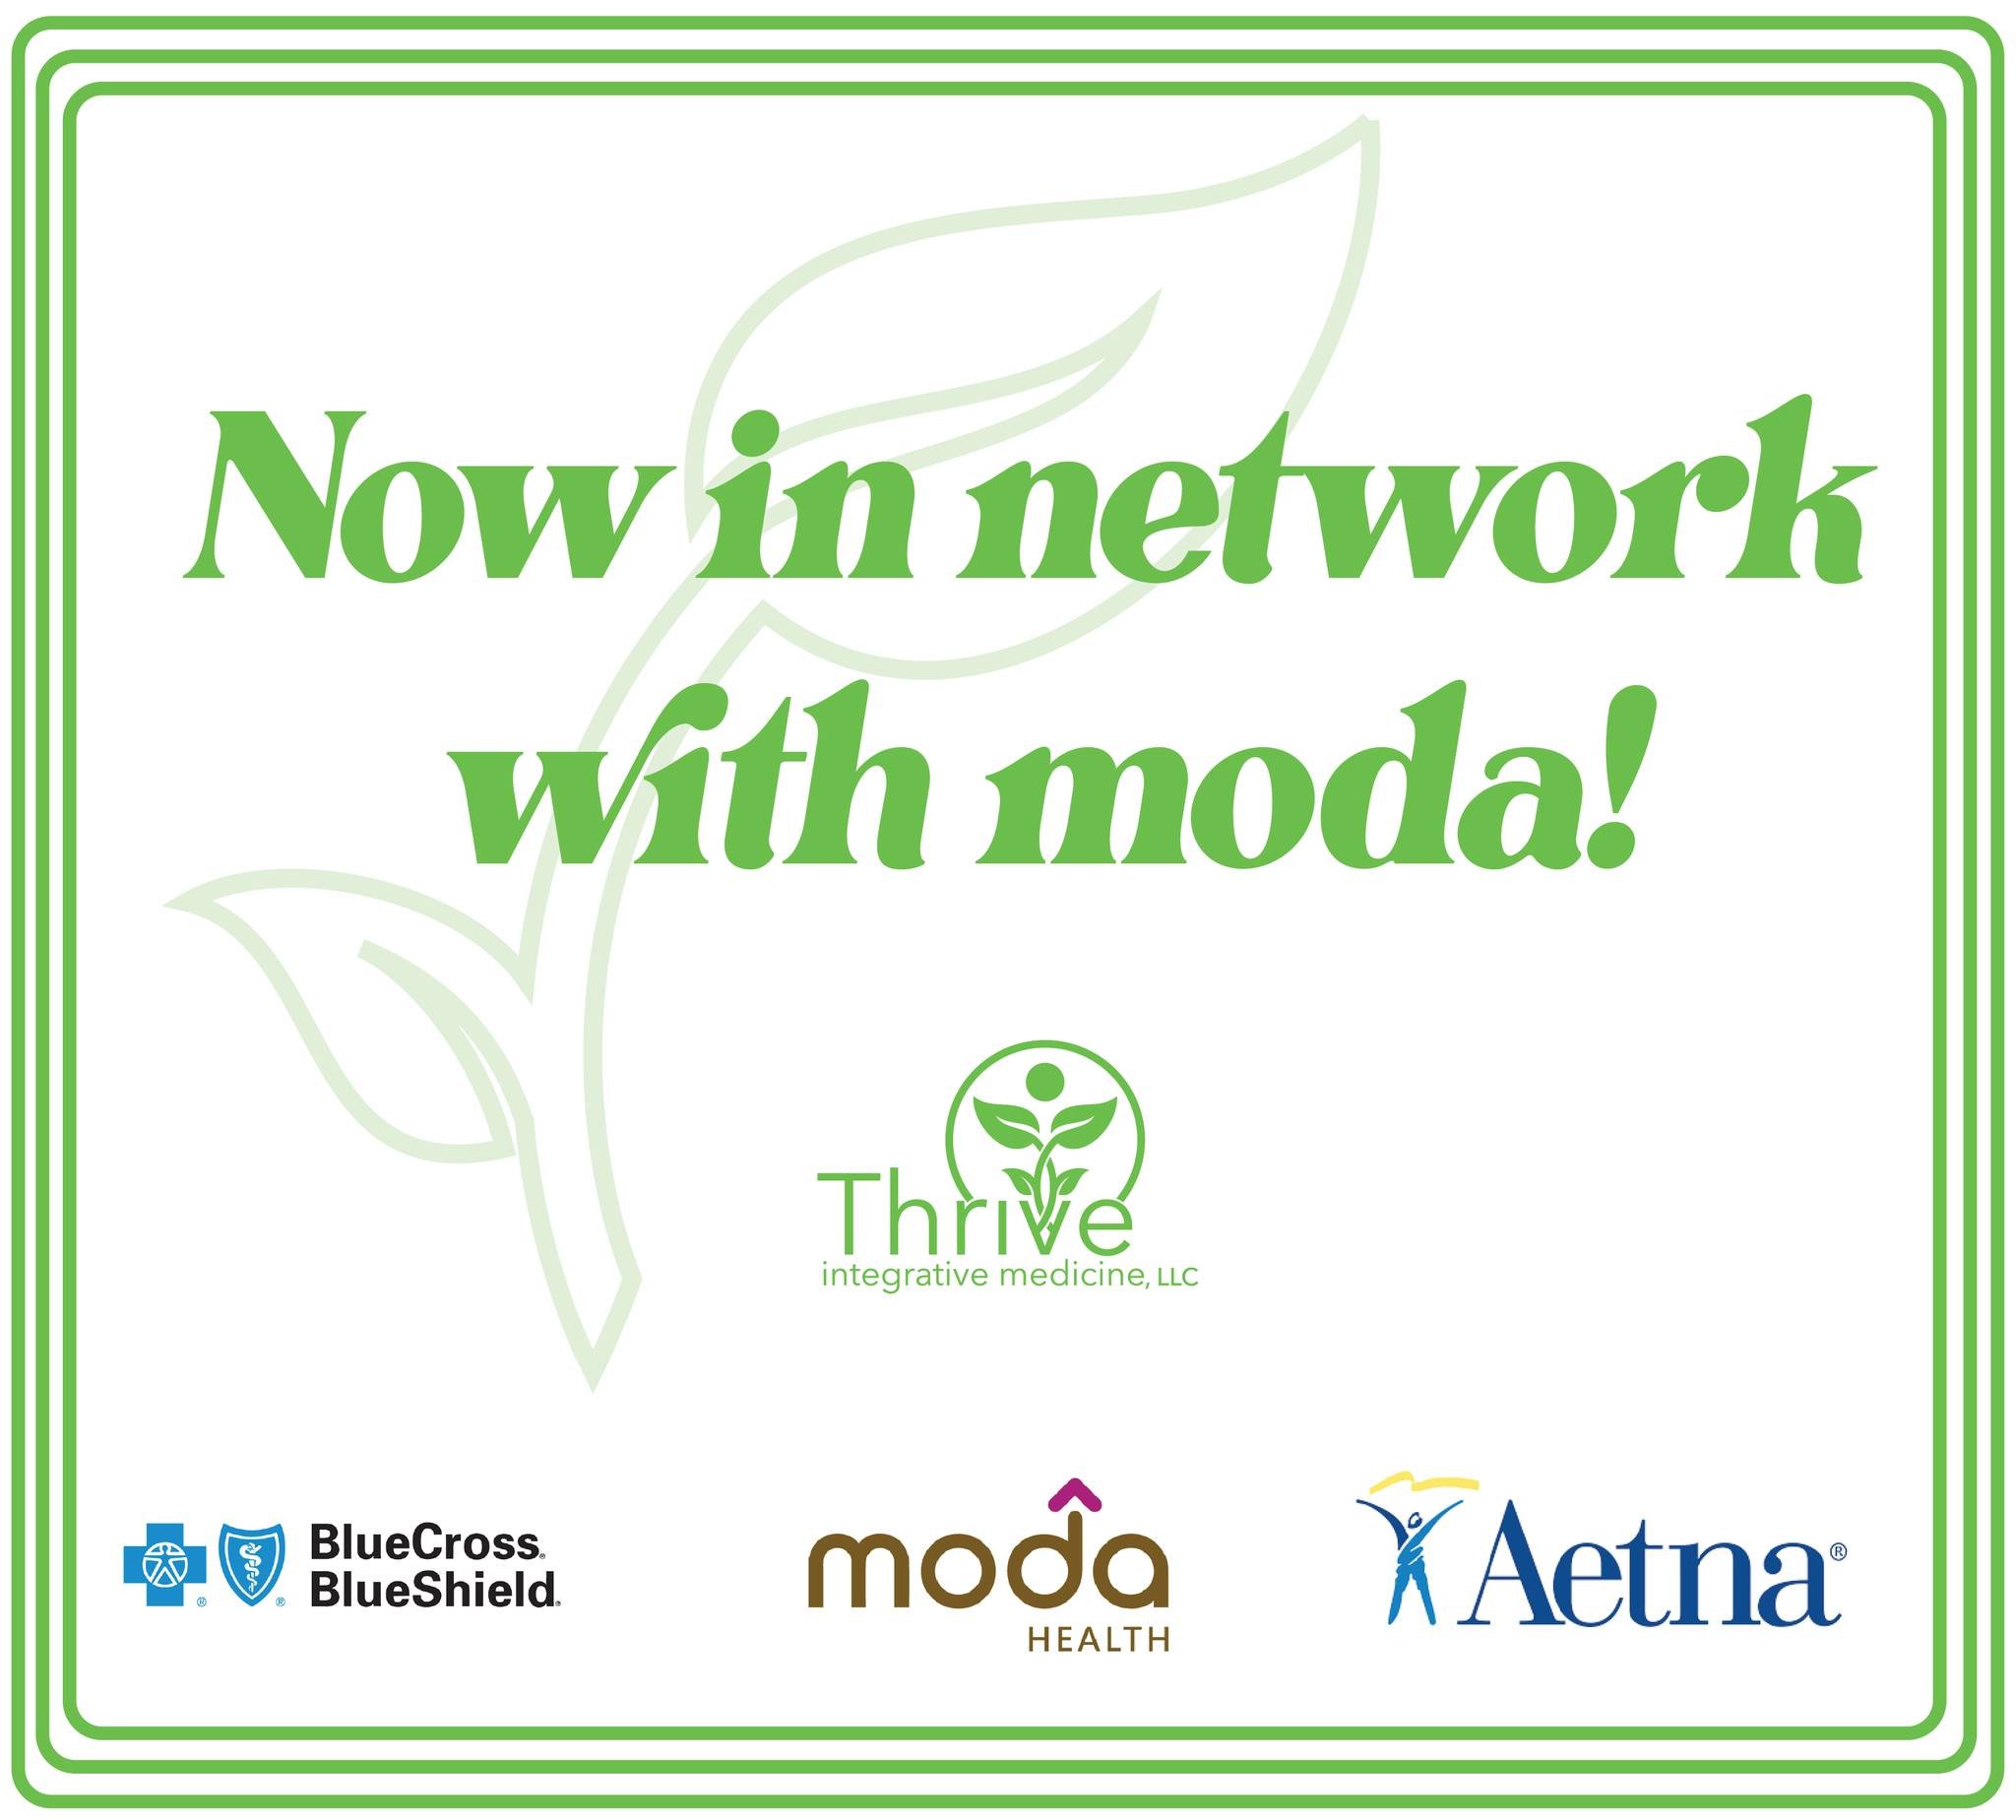 We're committed to making your journey to health as smooth as possible.

We accept most insurance and we are proud to be preferred providers with Aetna, Blue Cross, and now Moda! 

To ensure your visits are covered, we highly recommend calling your i